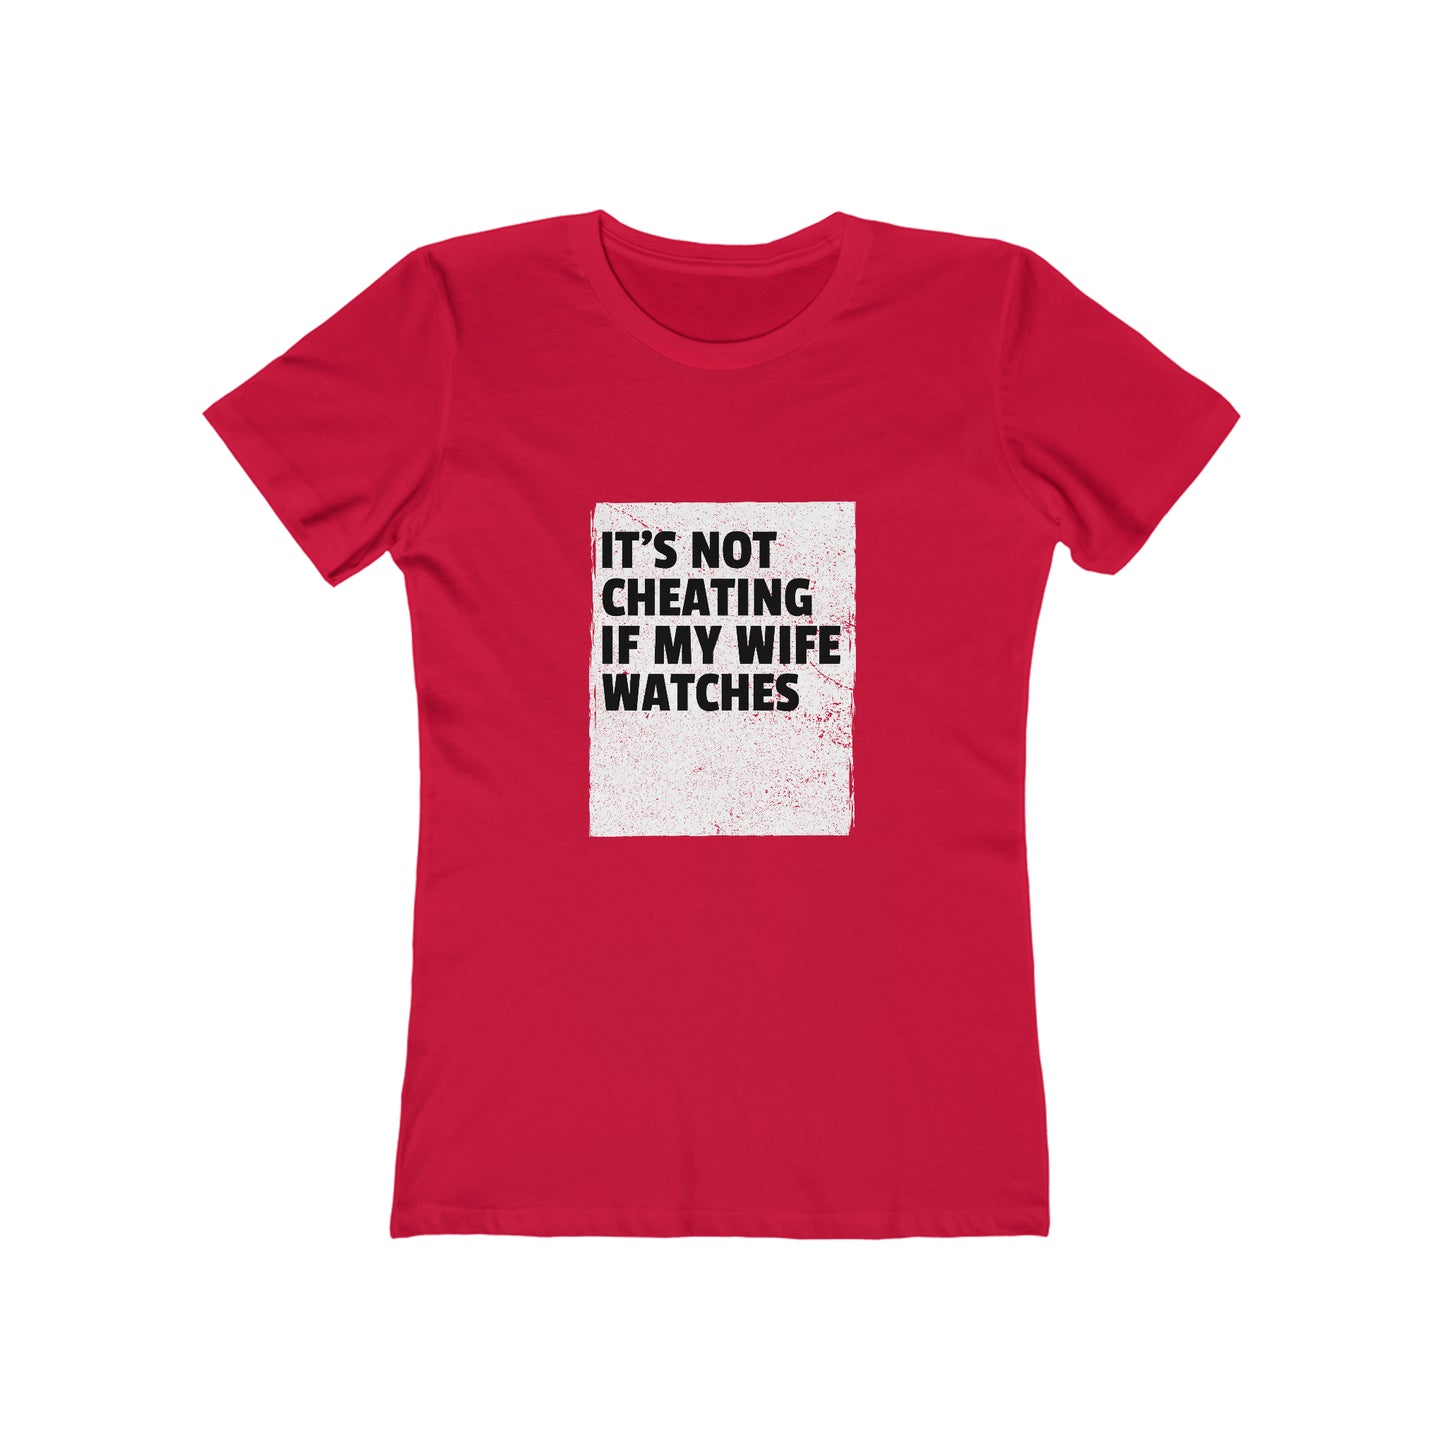 It's Not Cheating If My Wife Watches - Women's T-shirt